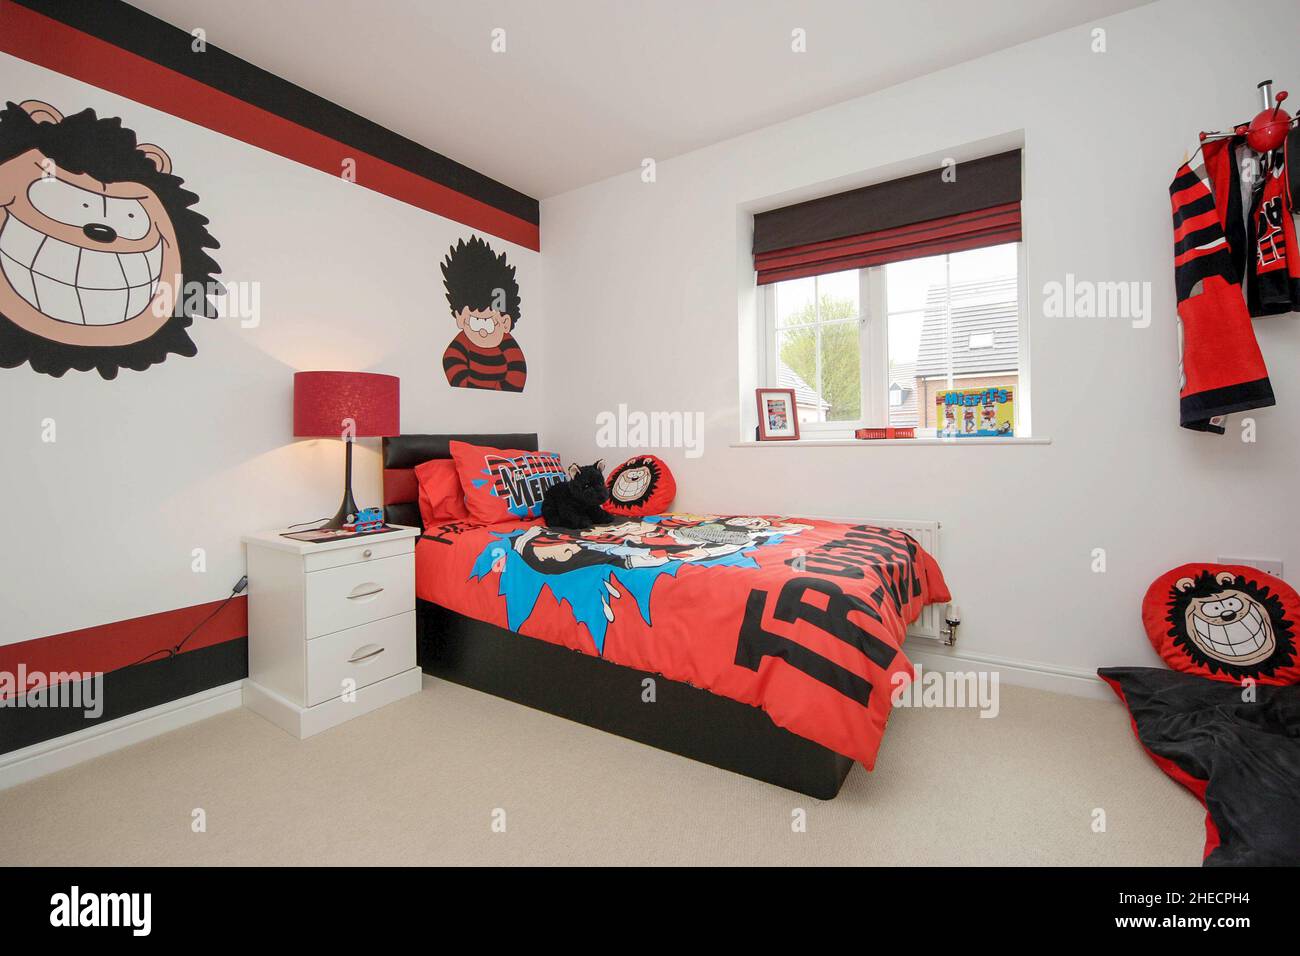 Childs boys bedroom,Dennis the Menace theme,bed,wall decor,lifestyle,Gnasher the dog. Stock Photo